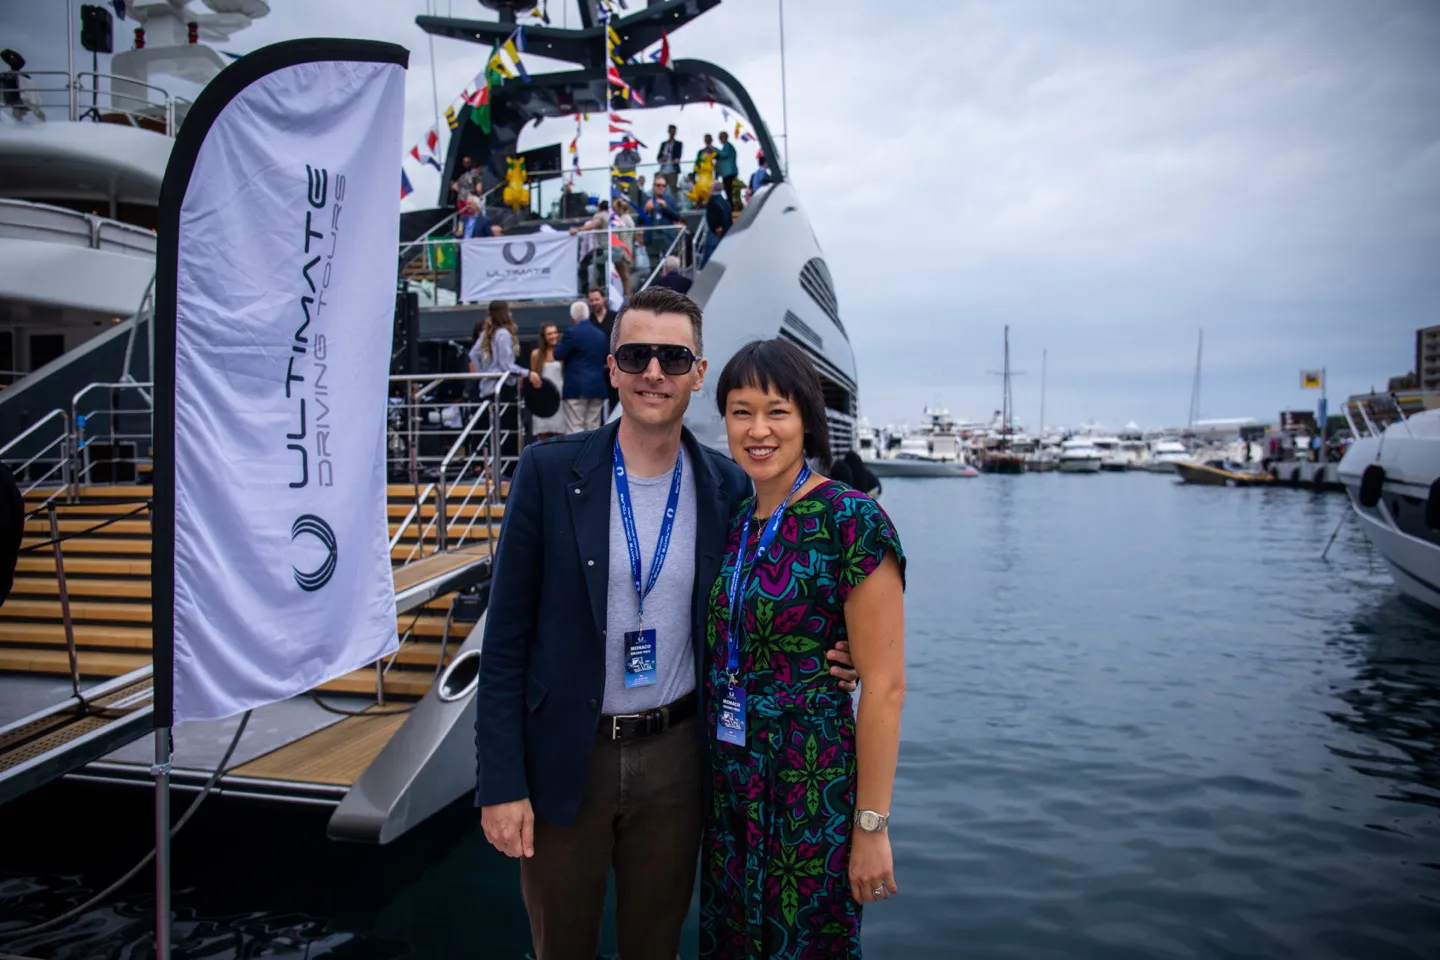 Couple standing in front of a superyacht during the F1 Grand Prix of Monaco